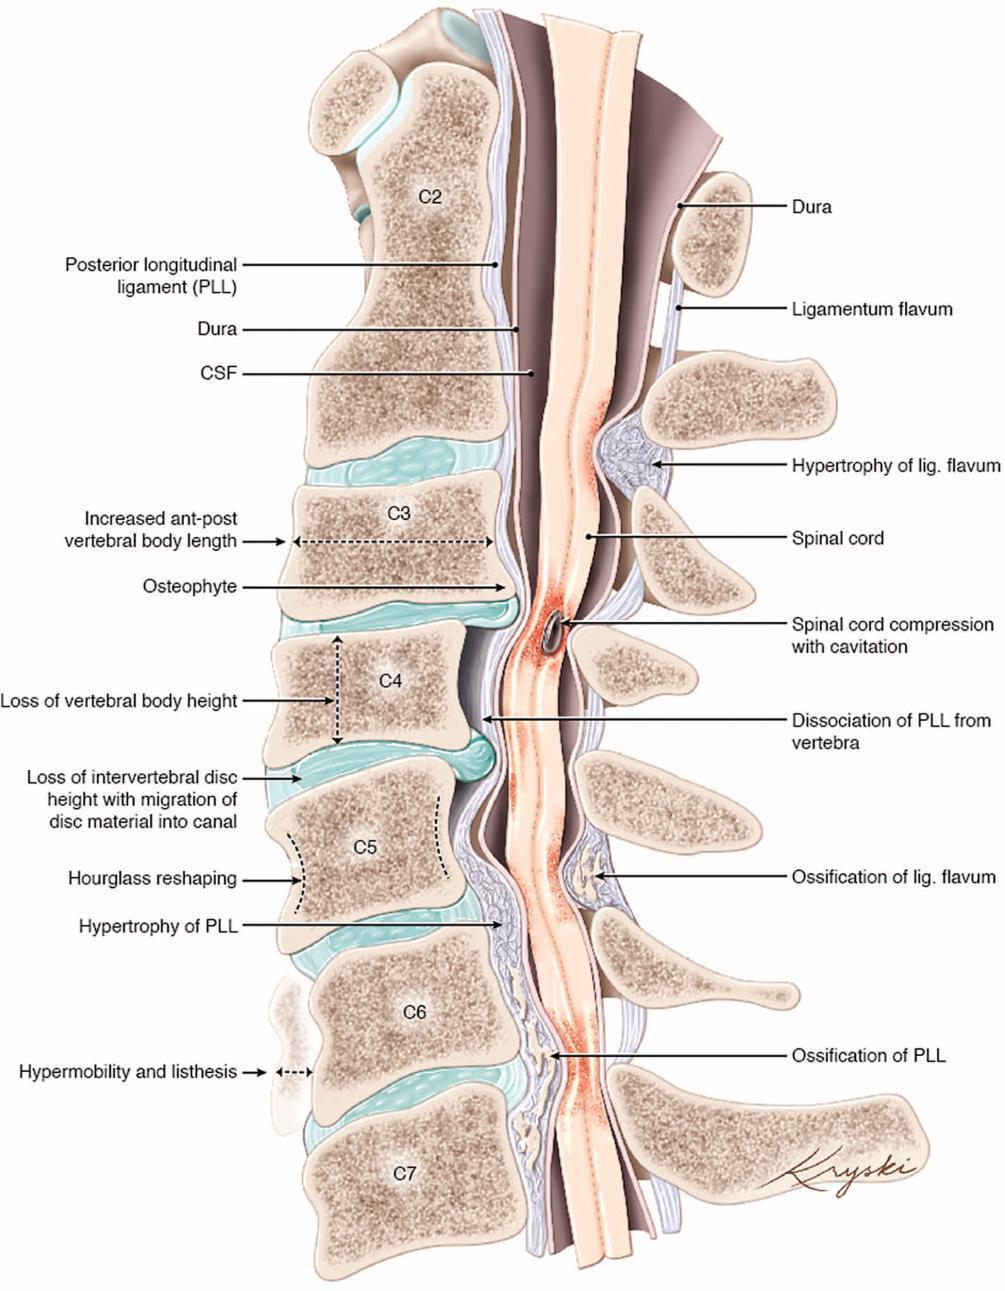 What DCM does to the spinal cord Ligament Dura Cerebrospinal fluid Increased vertebral body length Osteophyte Shortened vertebral body height Loss of disc height with bulging into canal Bone